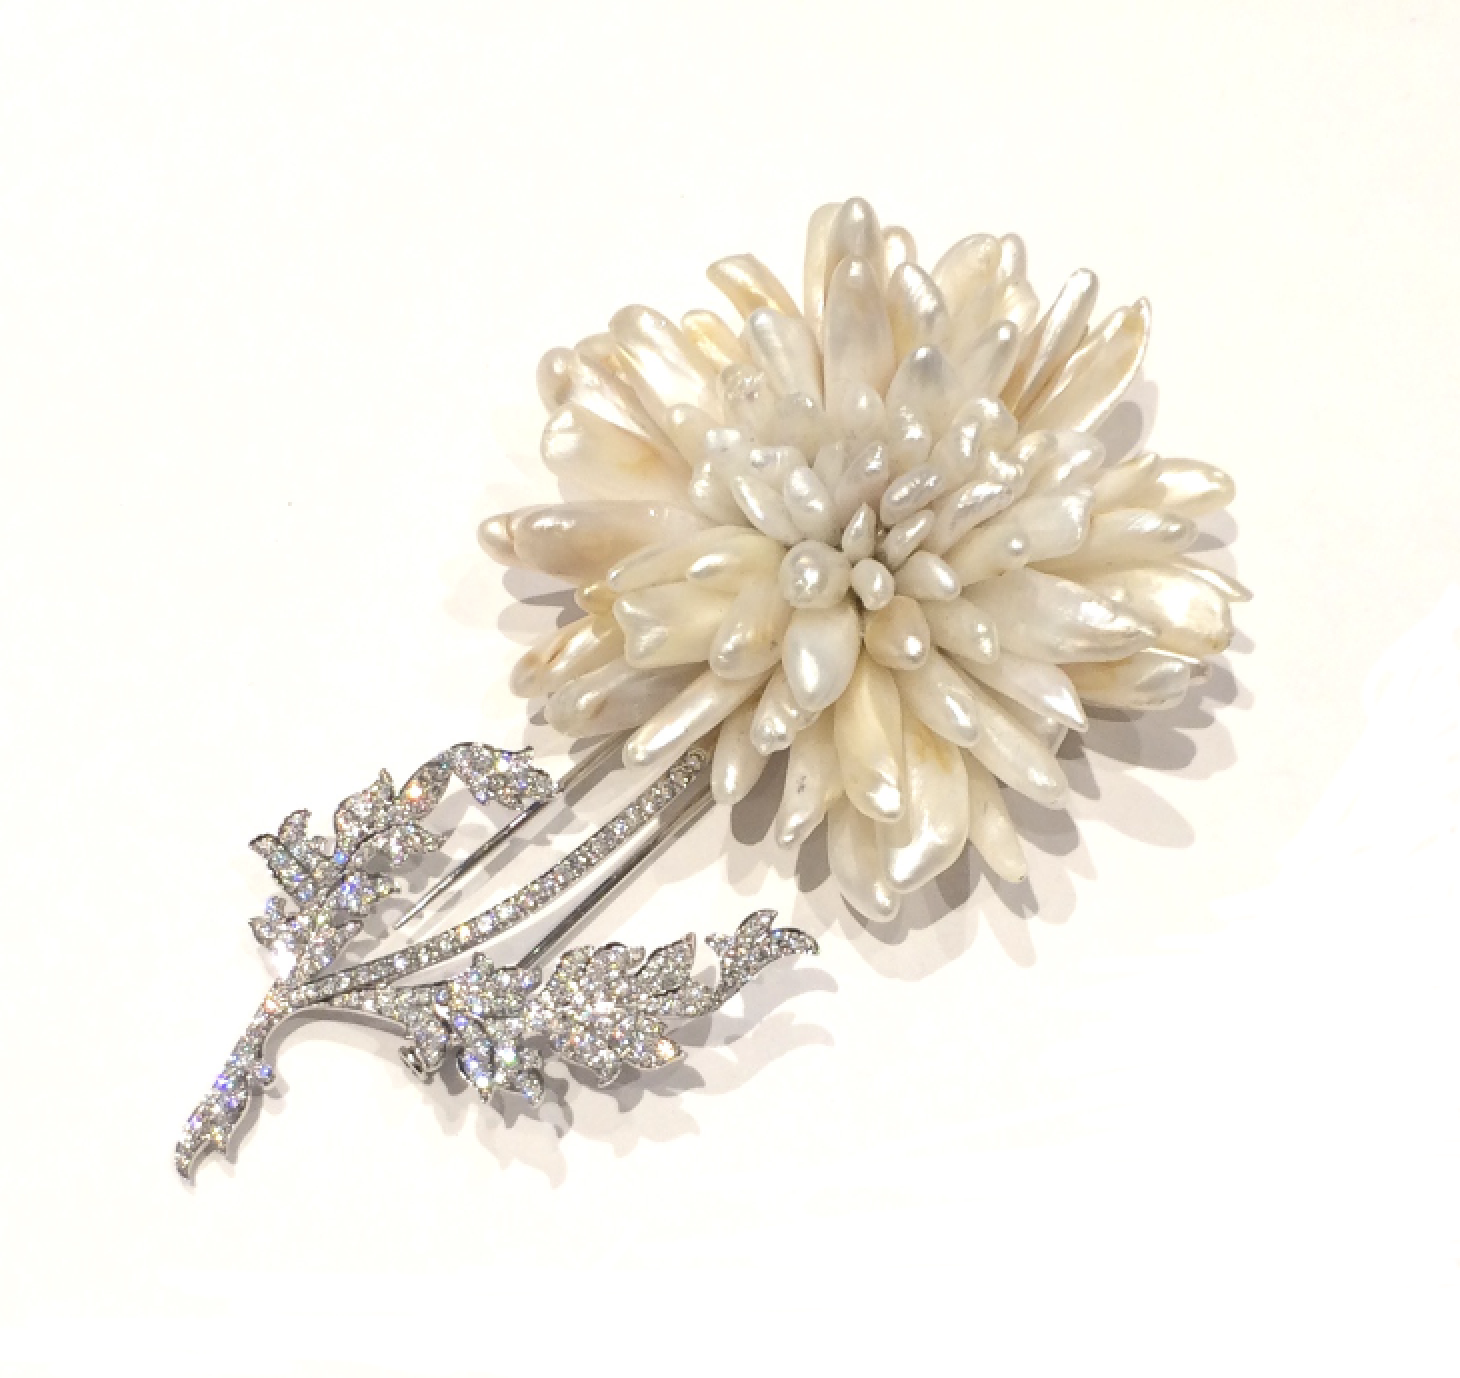 W. Truman Ltd. / Peter Truman for The Goldsmith’s Company “Chrysanthemum” brooch in platinum and diamonds and natural Mississippi pearls, retailed by Tiffany & Co. New York, signed, c. 2000